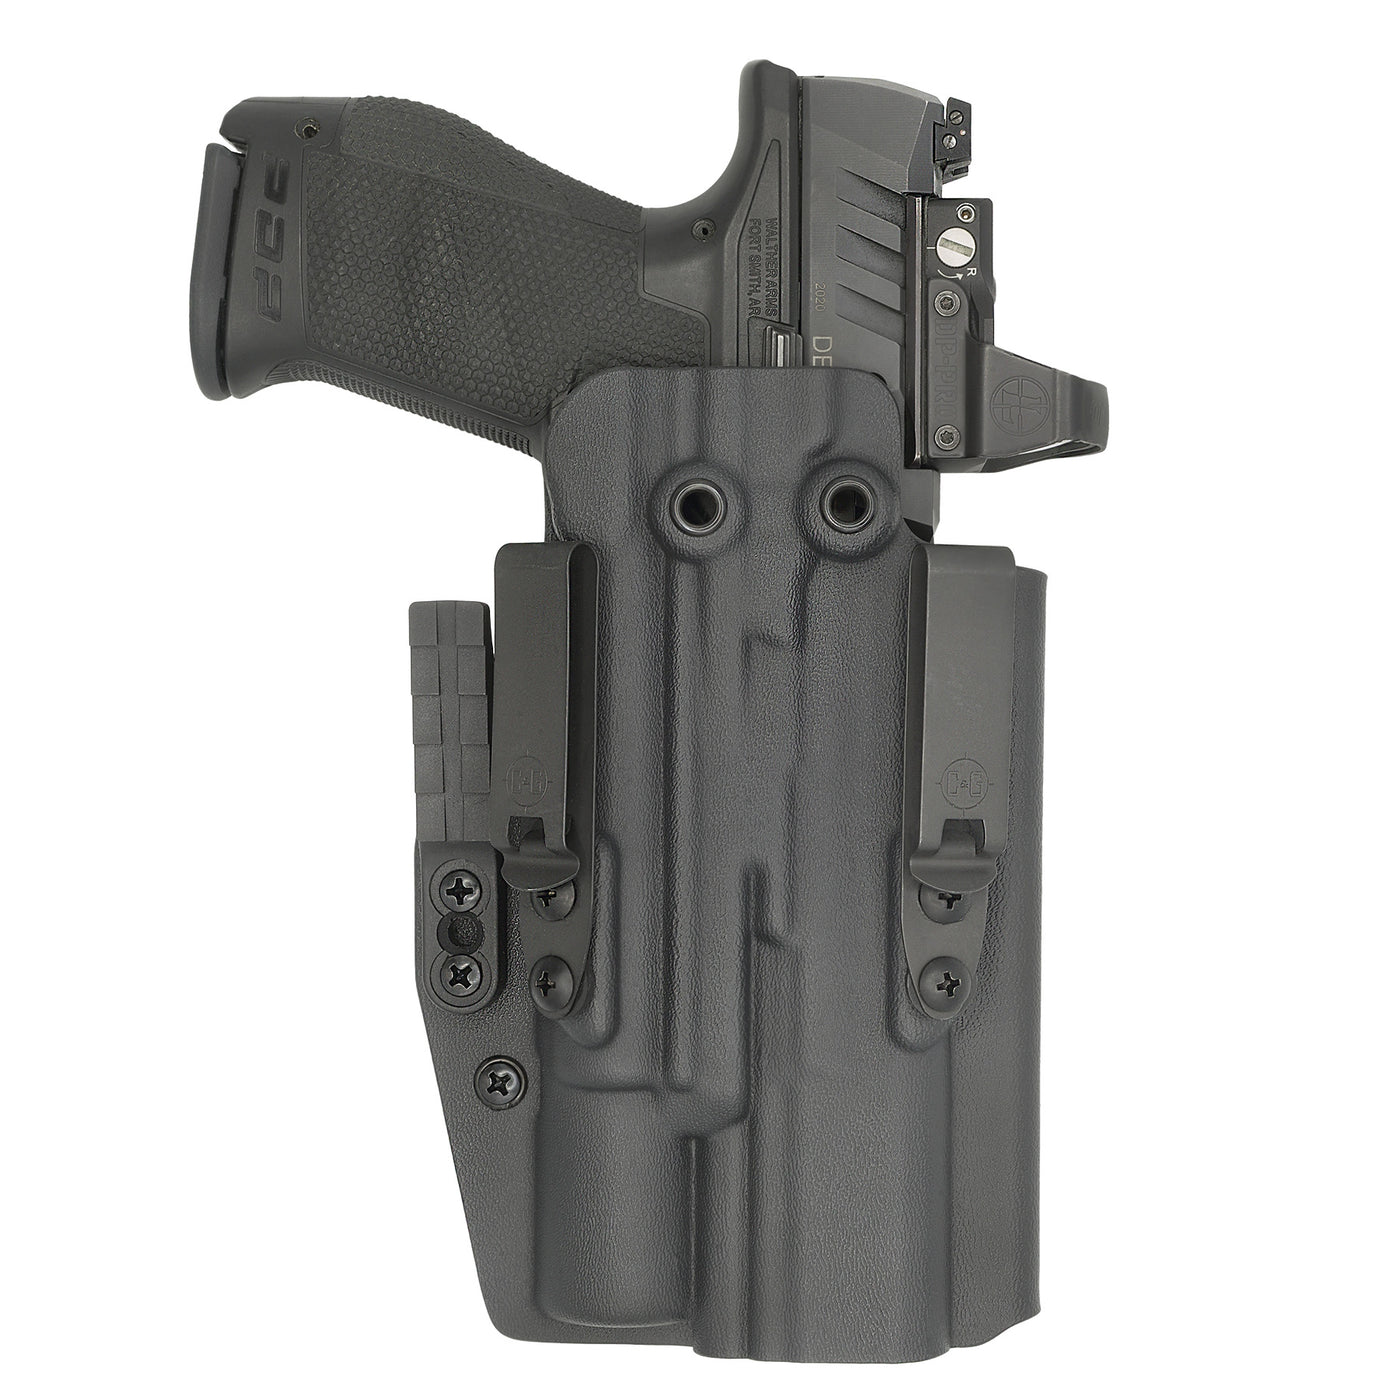 C&G Holsters quickship IWB Tactical ALPHA UPGRADE CZ P07/09 Surefire X300 in holstered position